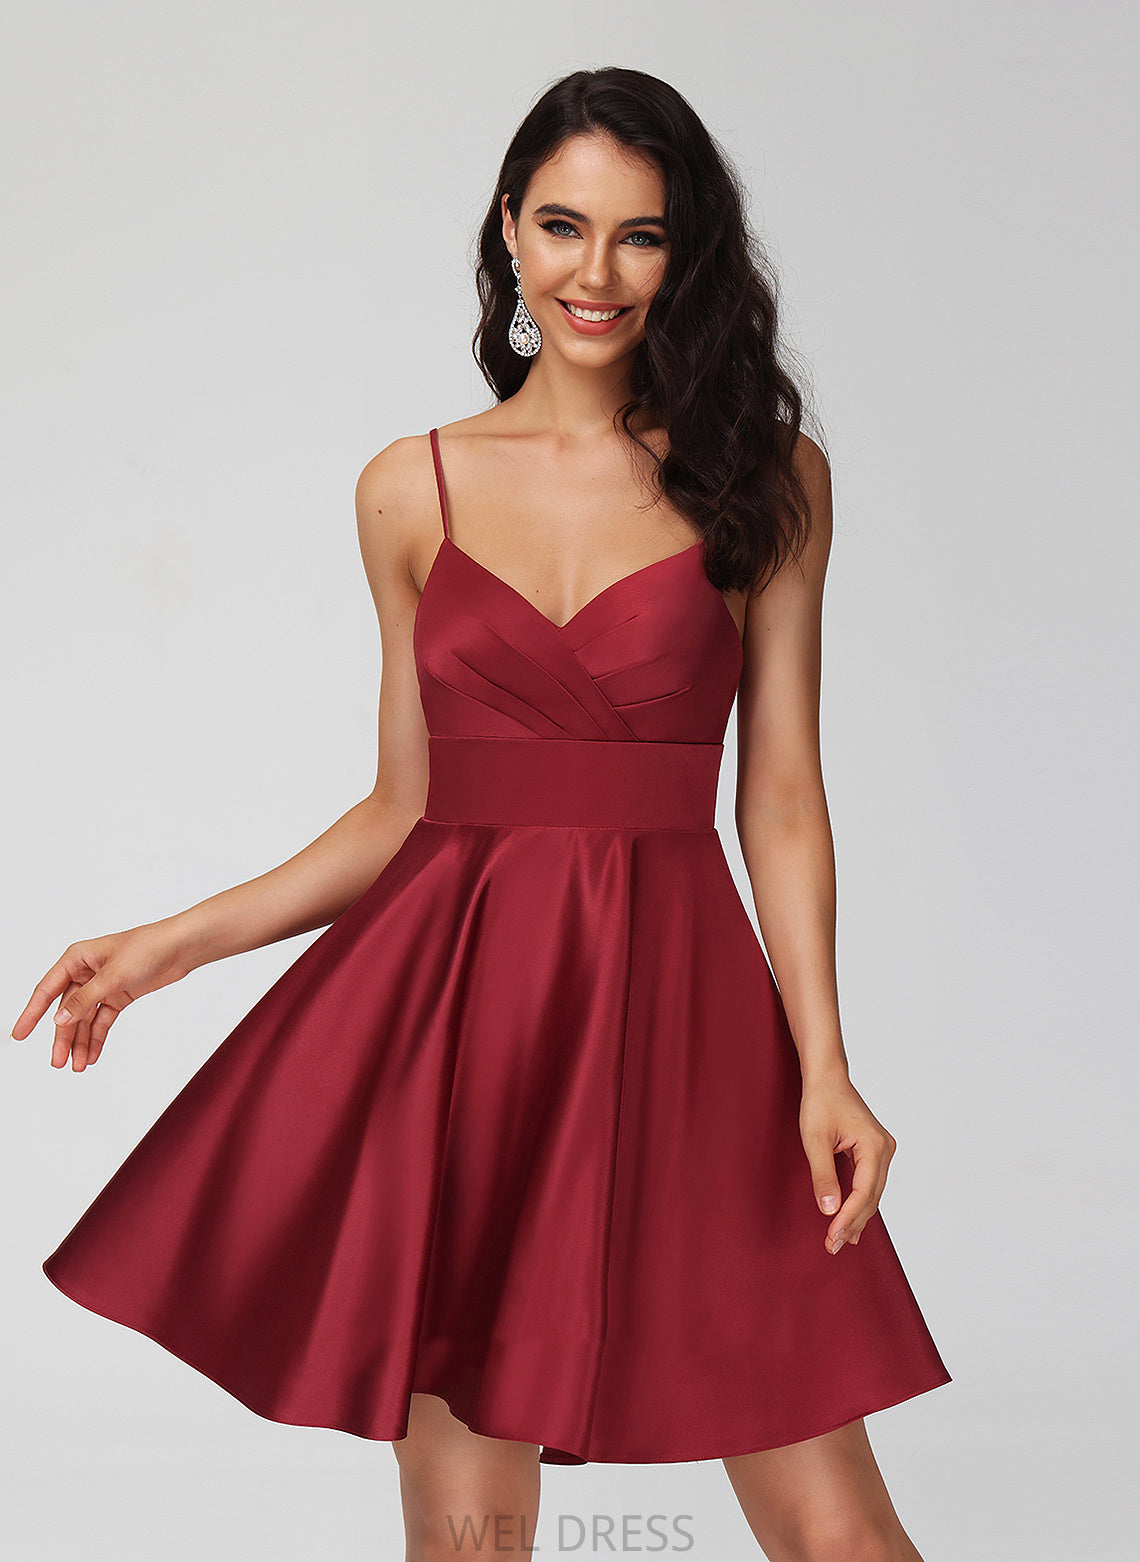 Homecoming Sheila Satin Short/Mini Homecoming Dresses With Dress Pleated A-Line V-neck